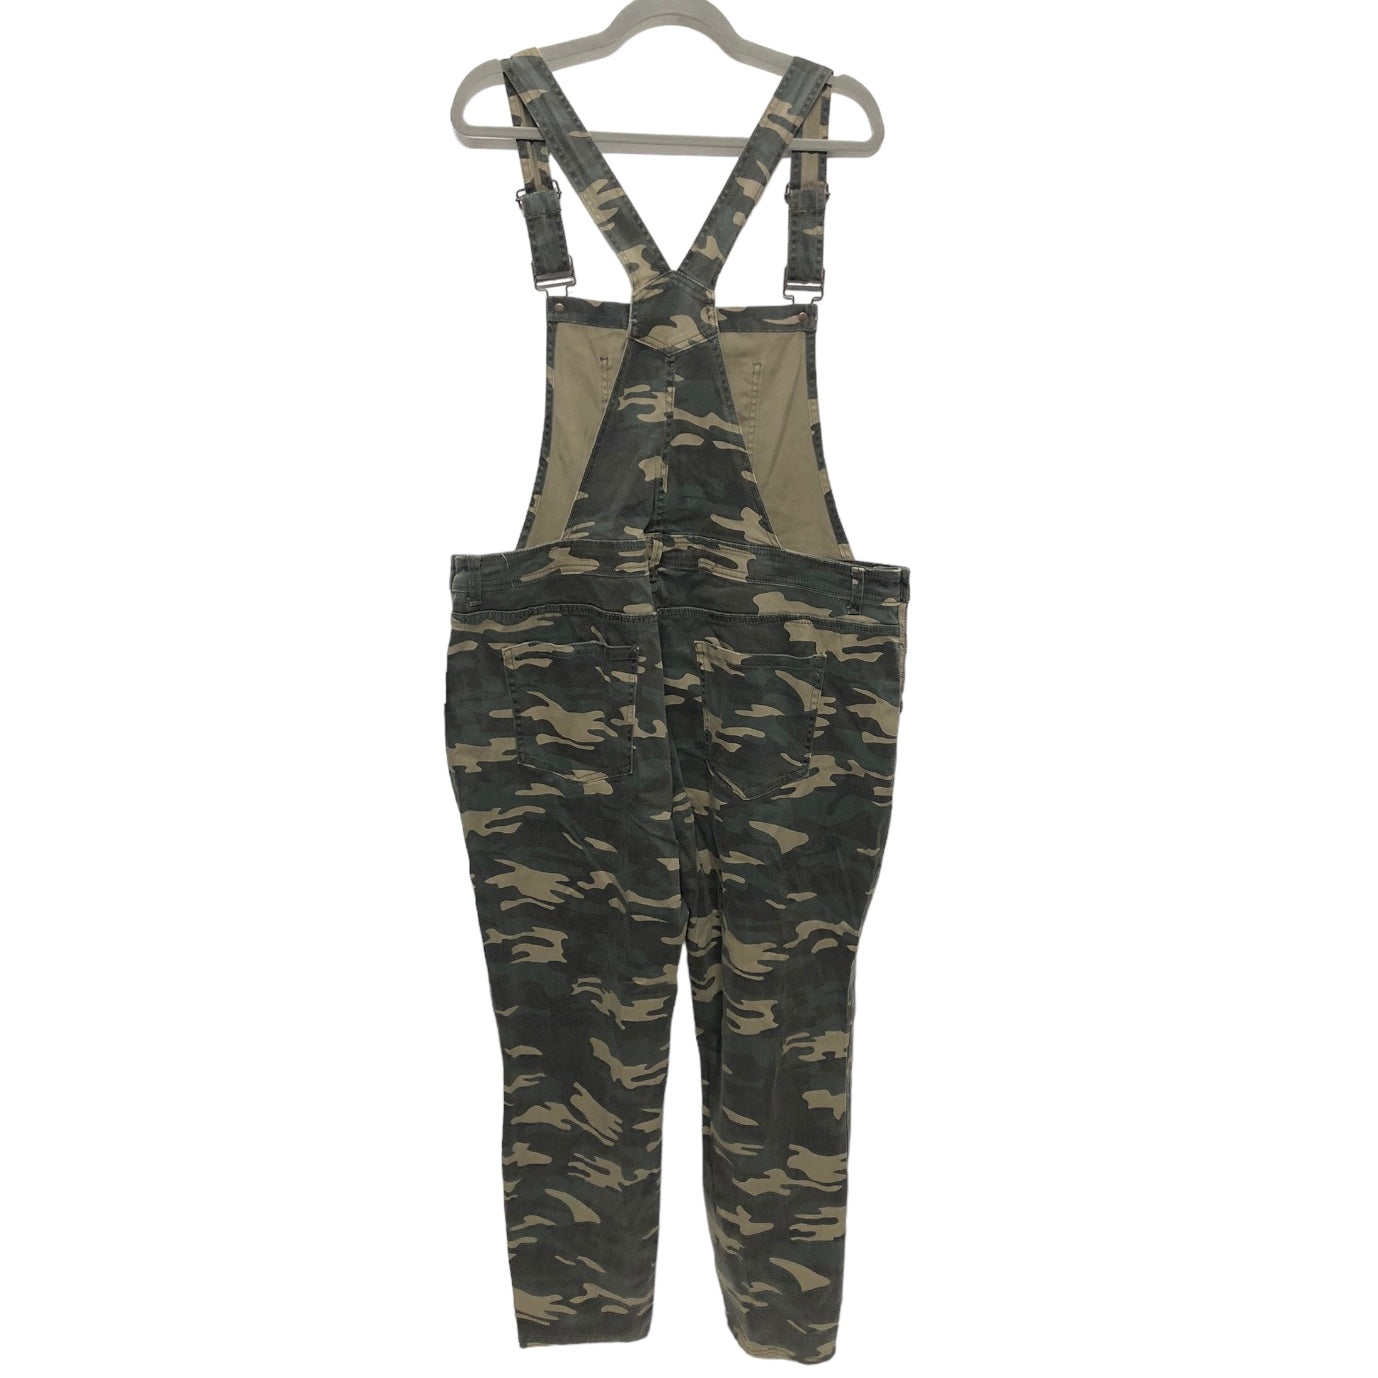 Camouflage Print Overalls Forever 21, Size 3x